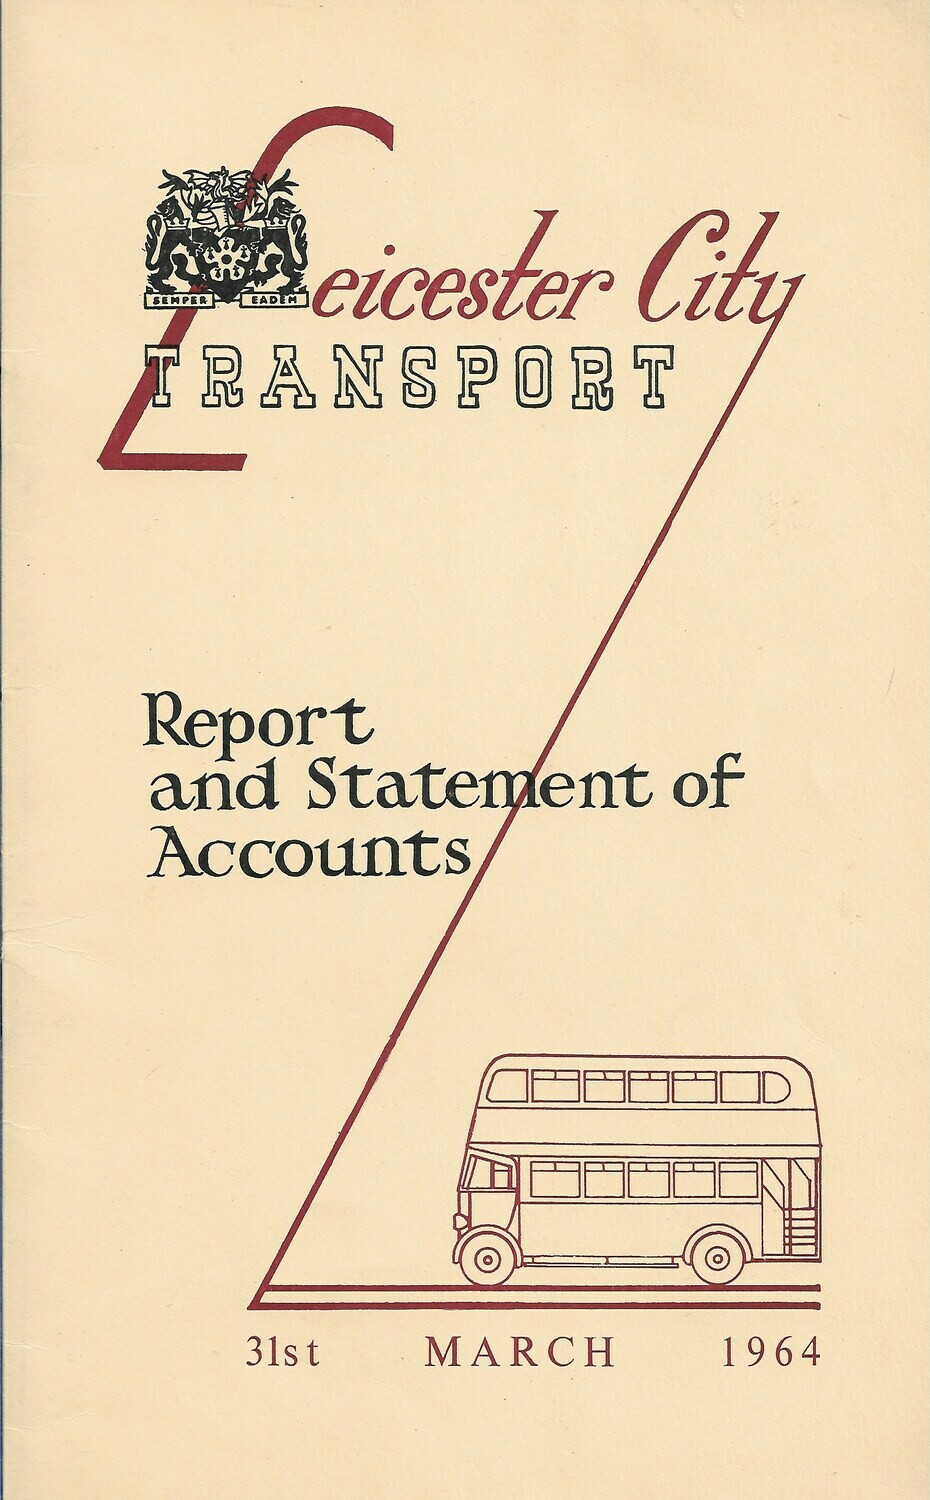 Leicester City Transport Report and Statement of Accounts Varied years - 1953, 1954, 1961, 1962, 1964